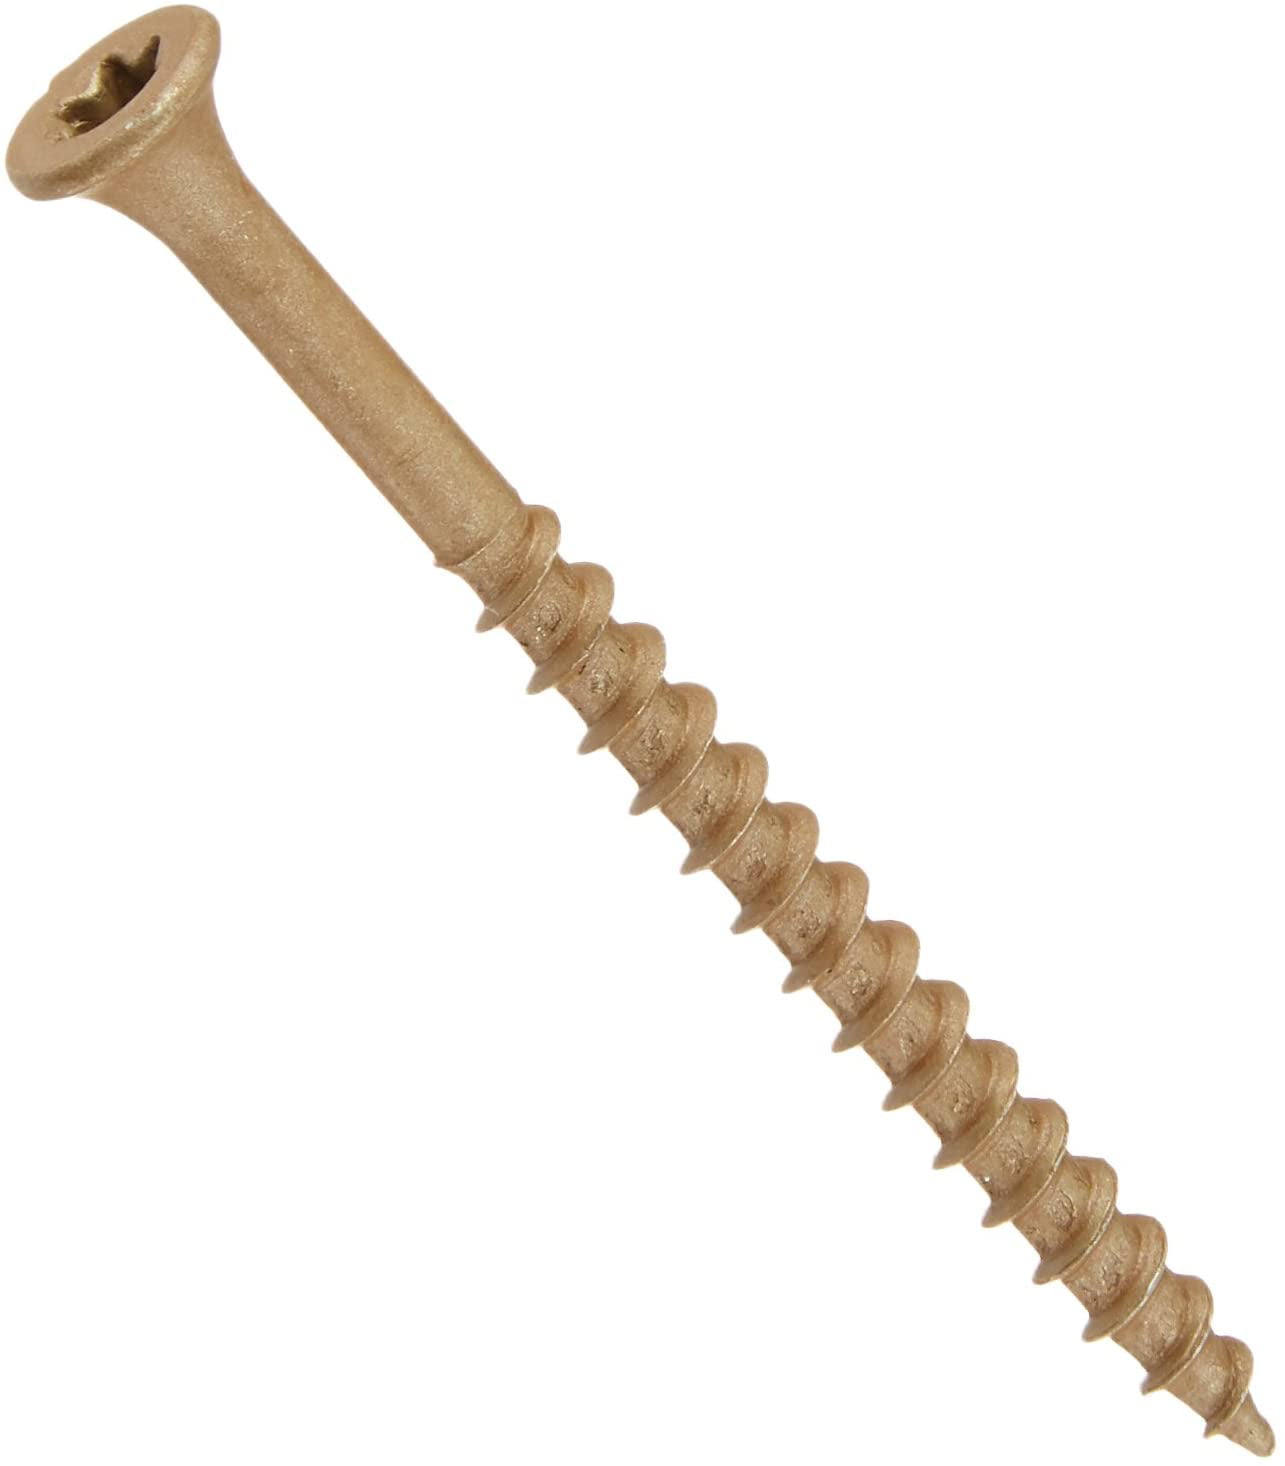 NATIONAL NAIL 356150 100CT 2-1/2-Inch by 9-Inch Deck Screw 